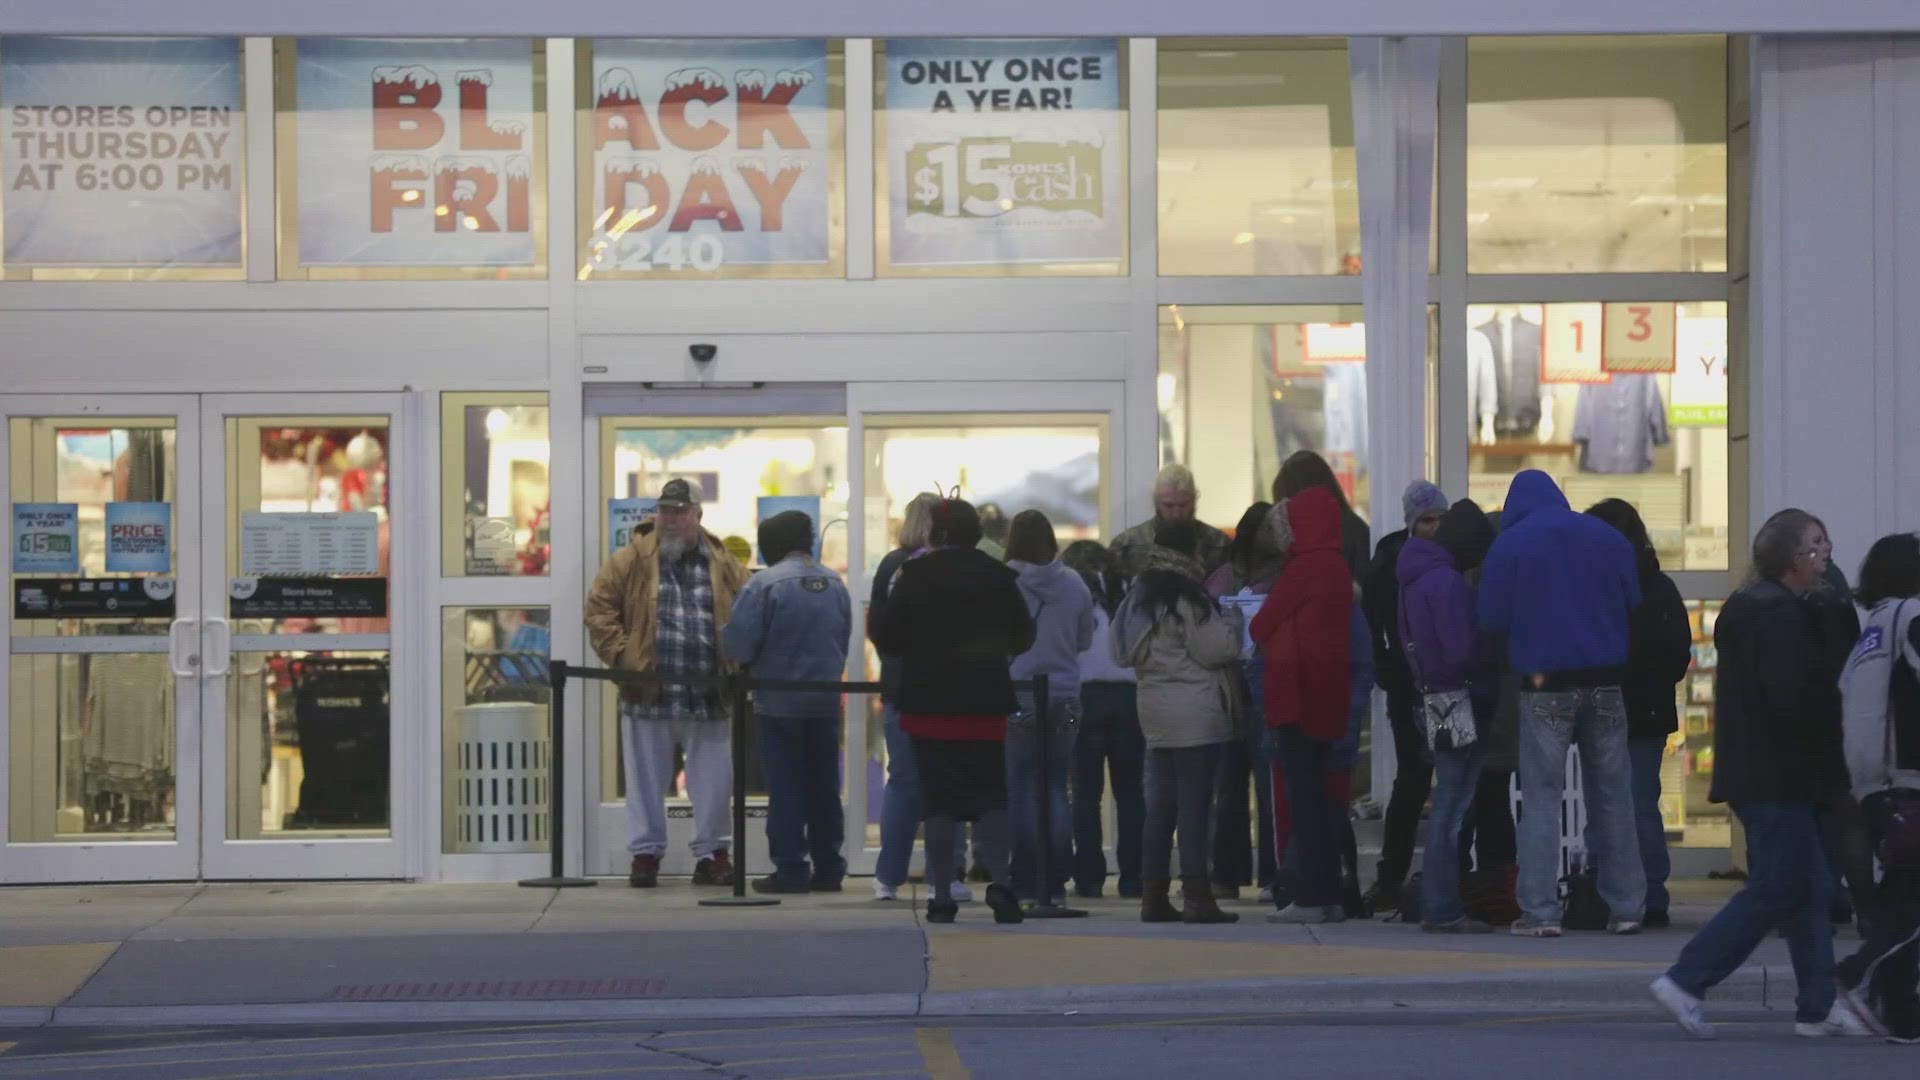 Online shopping has shortened the lines that form outside of stores ahead of Black Friday, but people are now spending more on this holiday weekend.